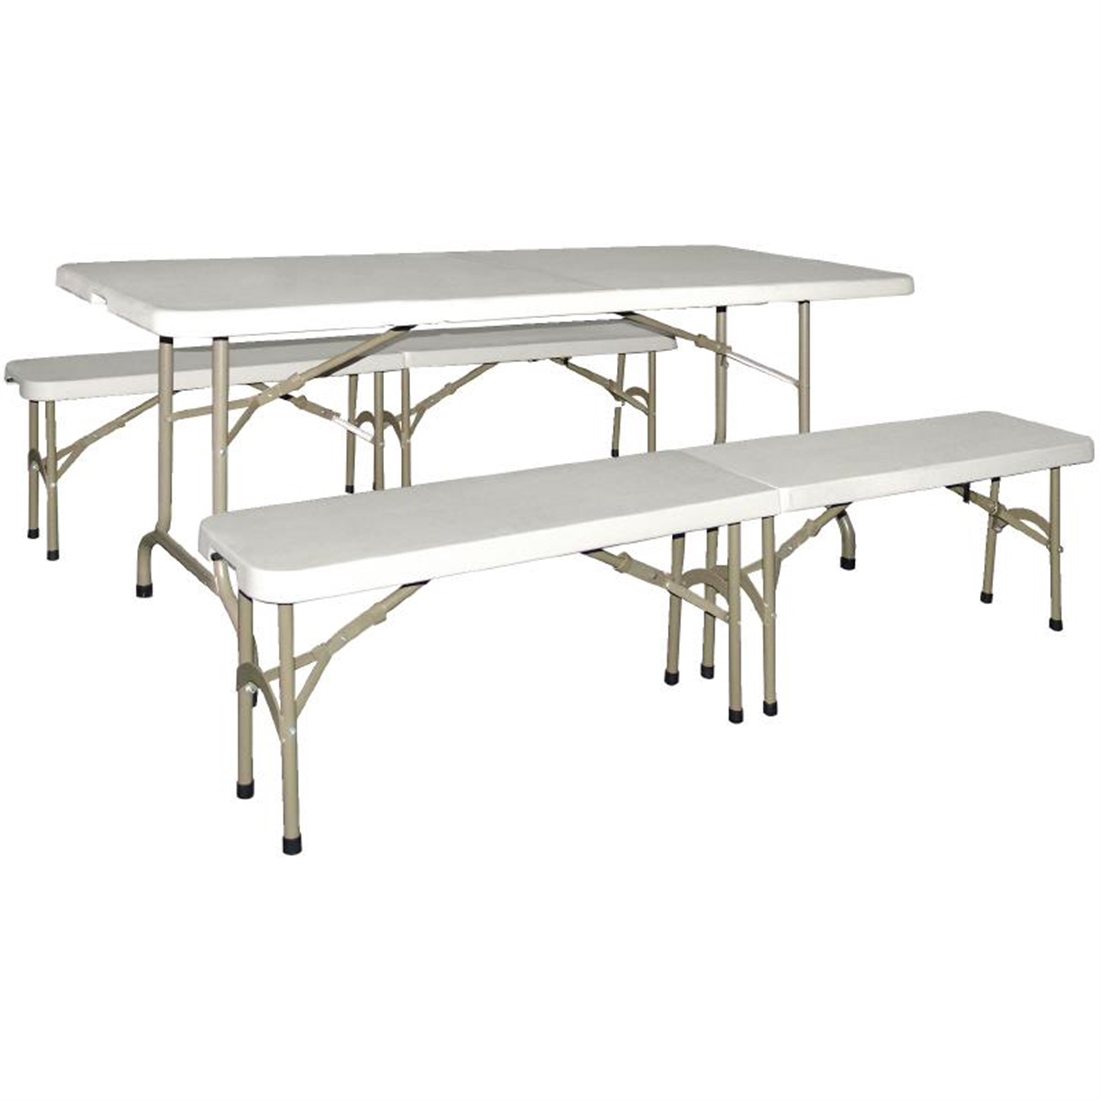 Special Offer Bolero 6ft Centre Folding Table with Two Folding Benches